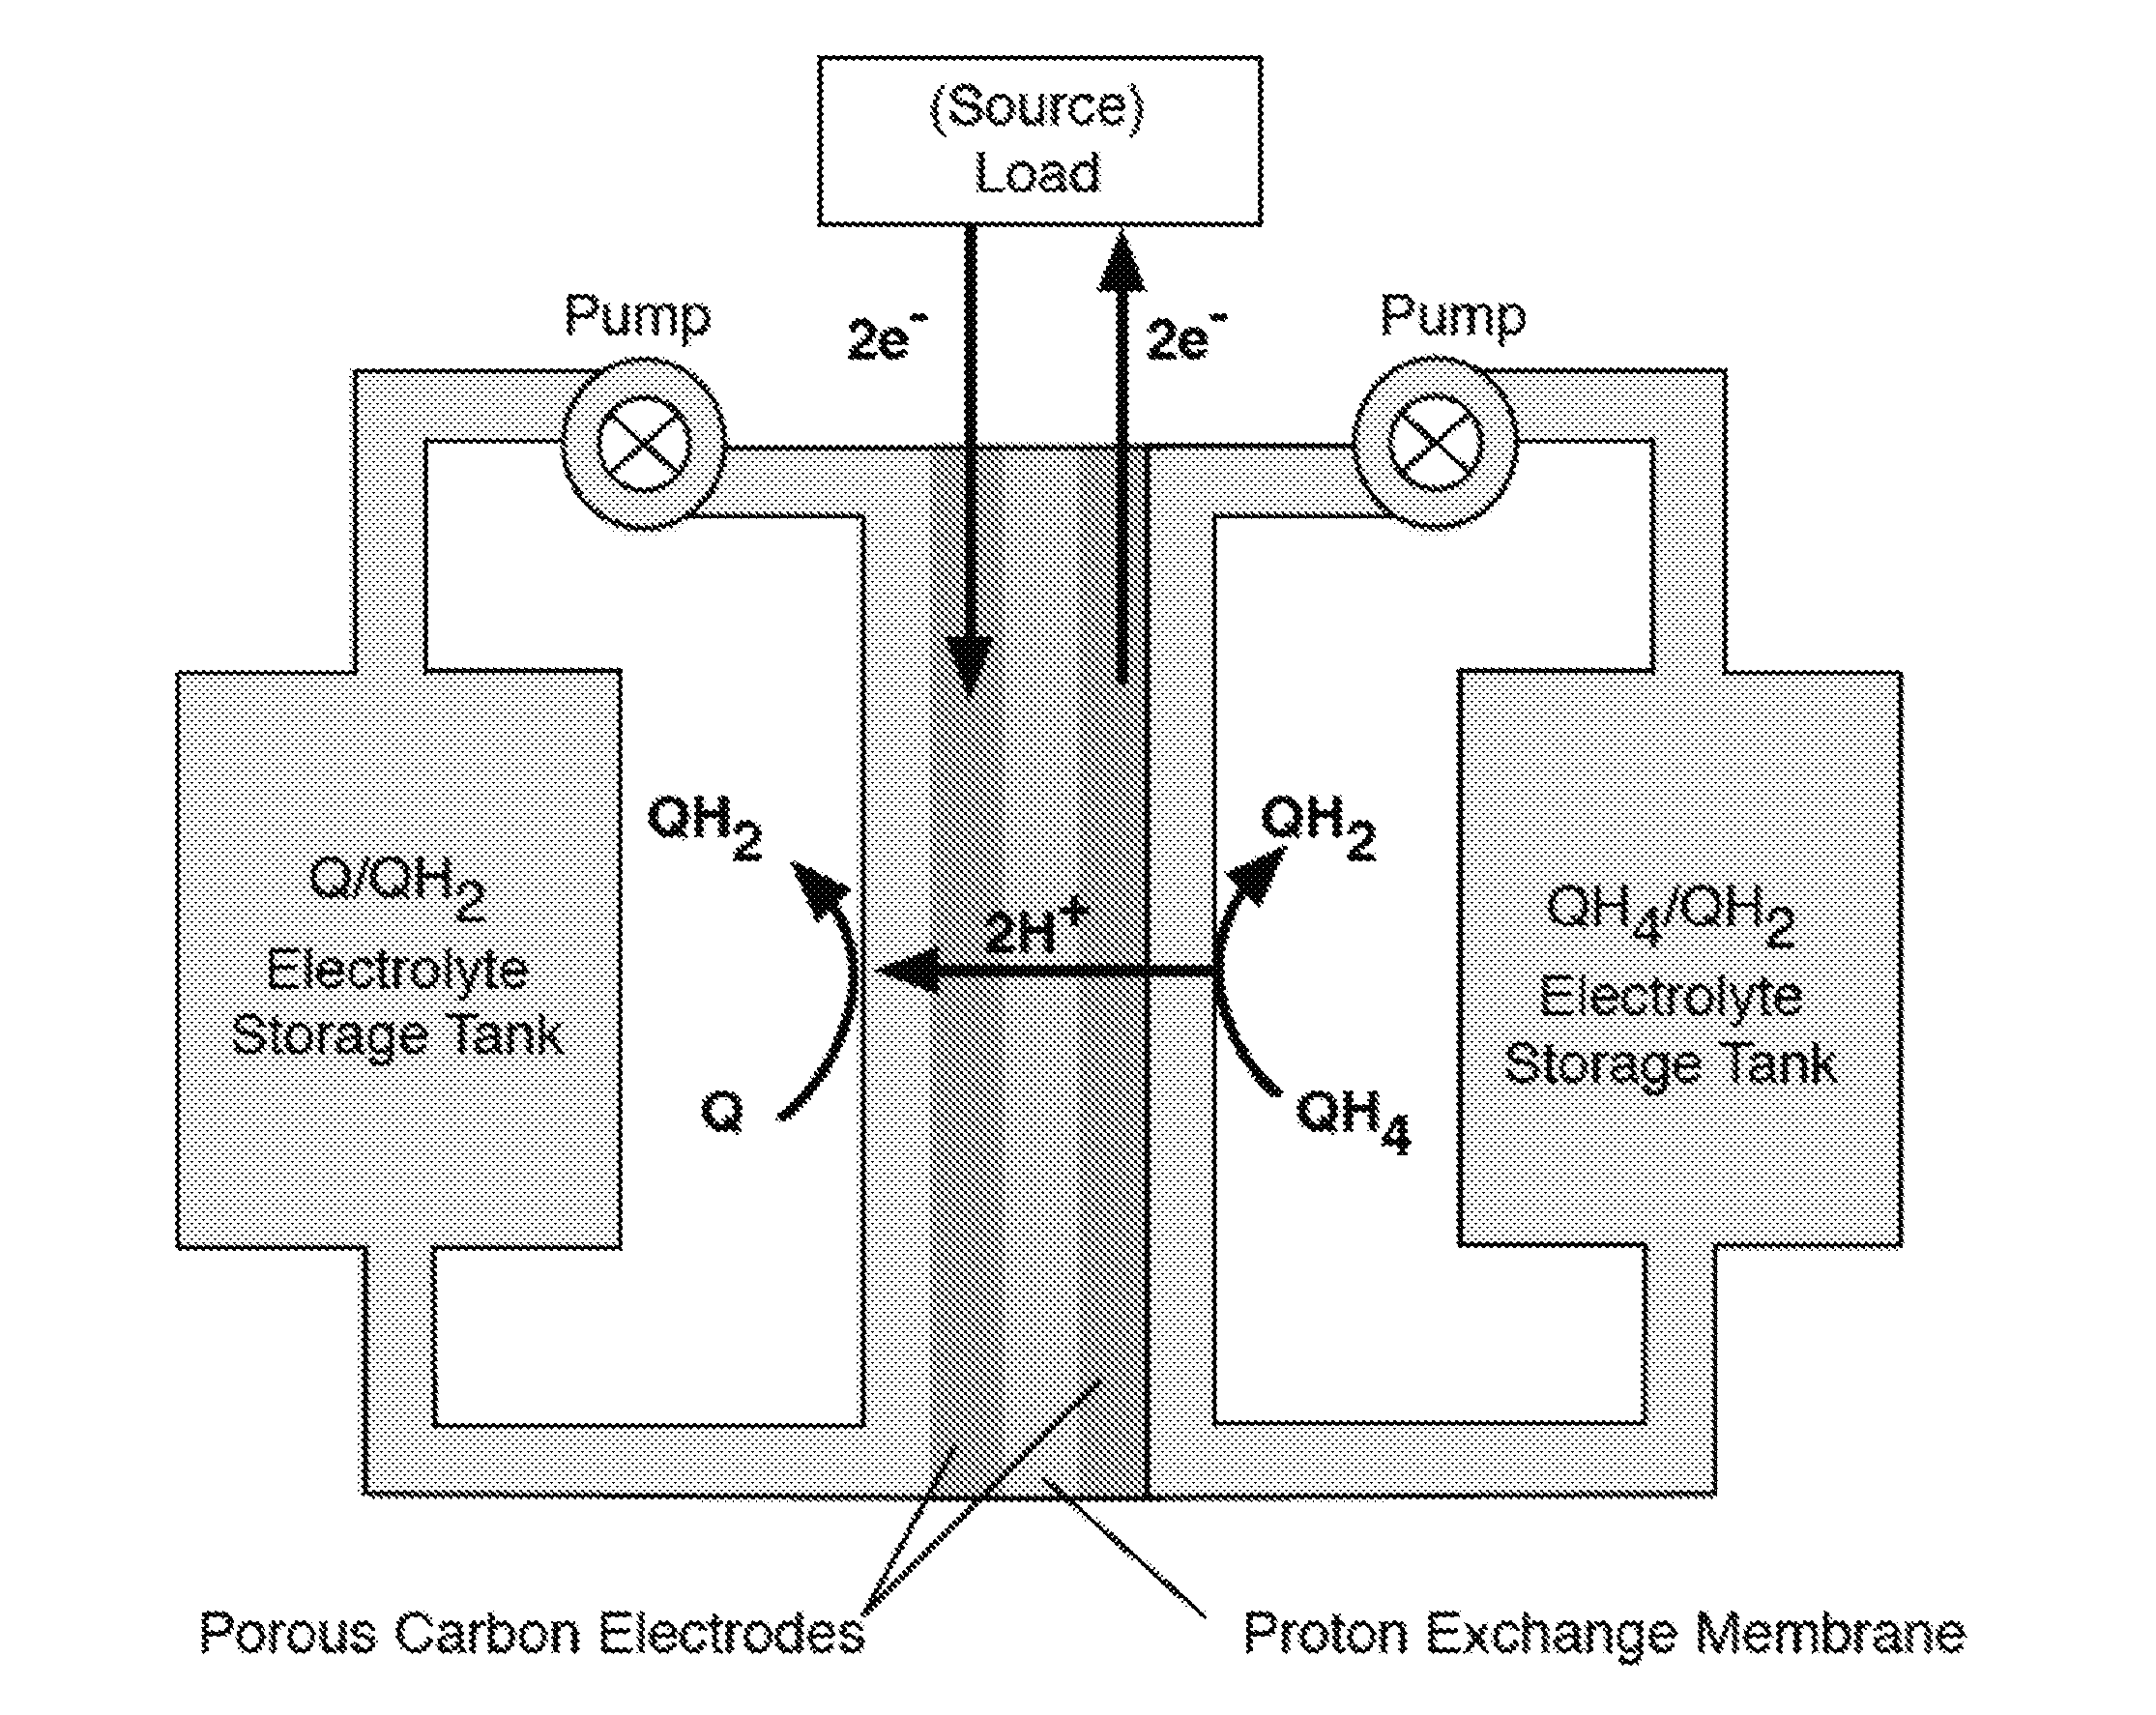 Quinone and hydroquinone based flow battery